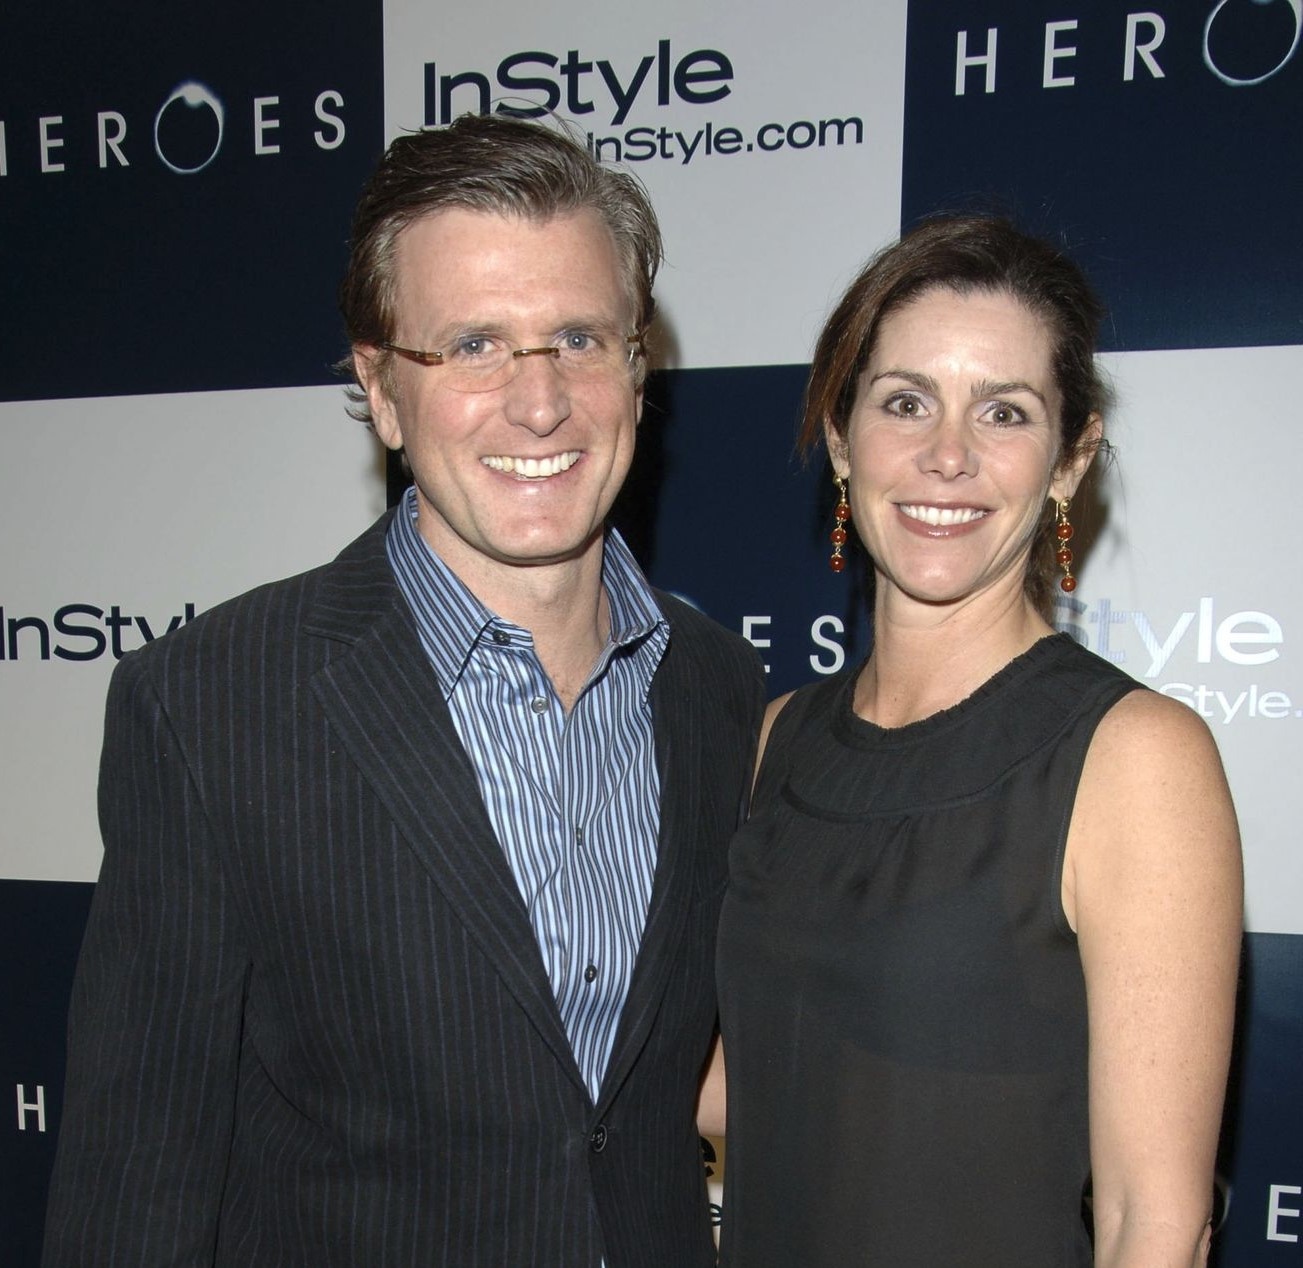 Kevin Reilly with his beautiful wife, Cristan Reilly, attending an event. 